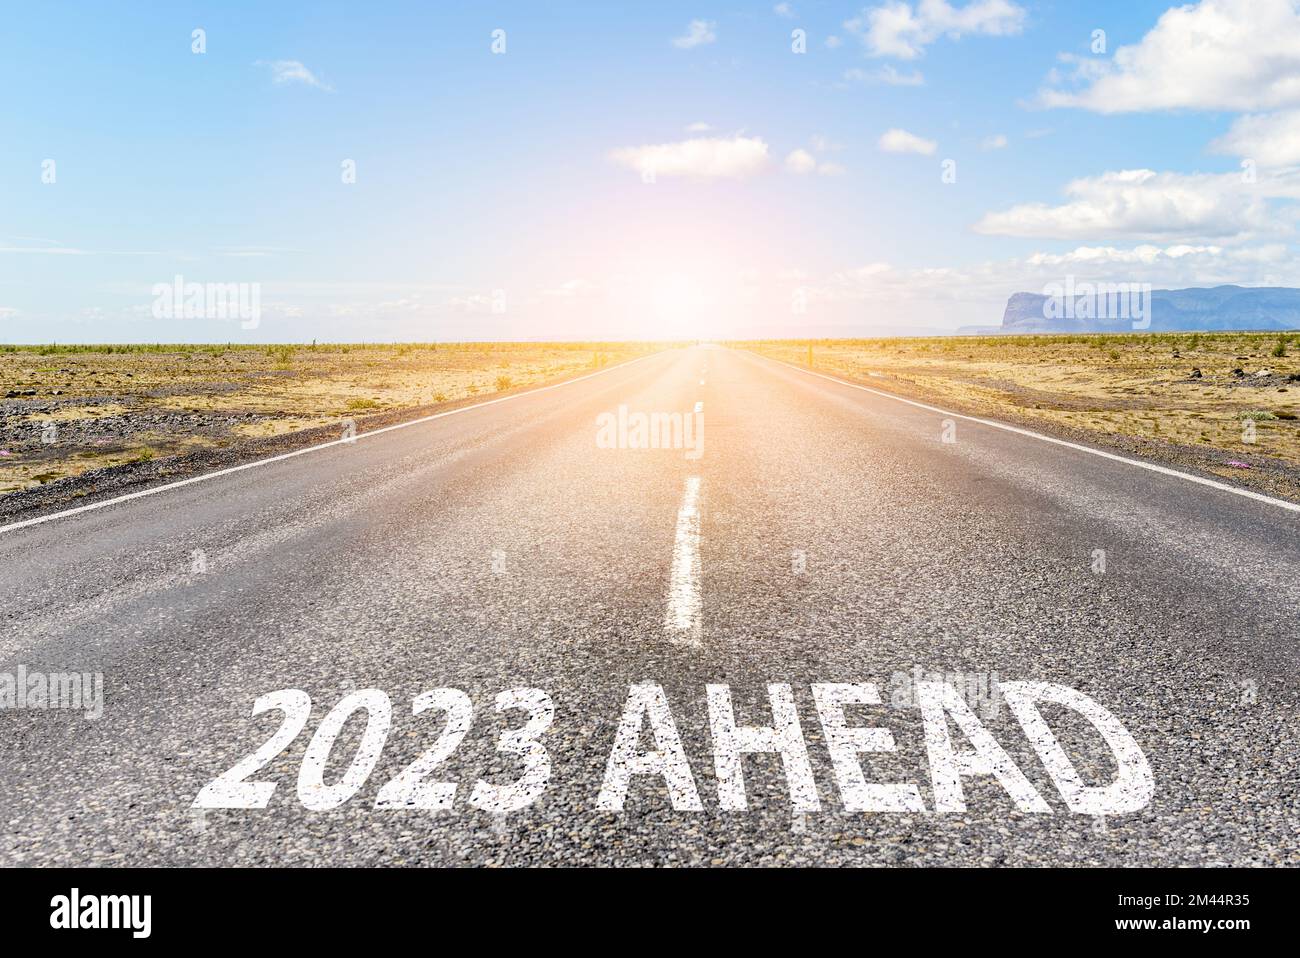 New year 2023 ahead. Conceptual empty straight road in a flat landscape with the phrase 2023 ahead painted on asphalt Stock Photo